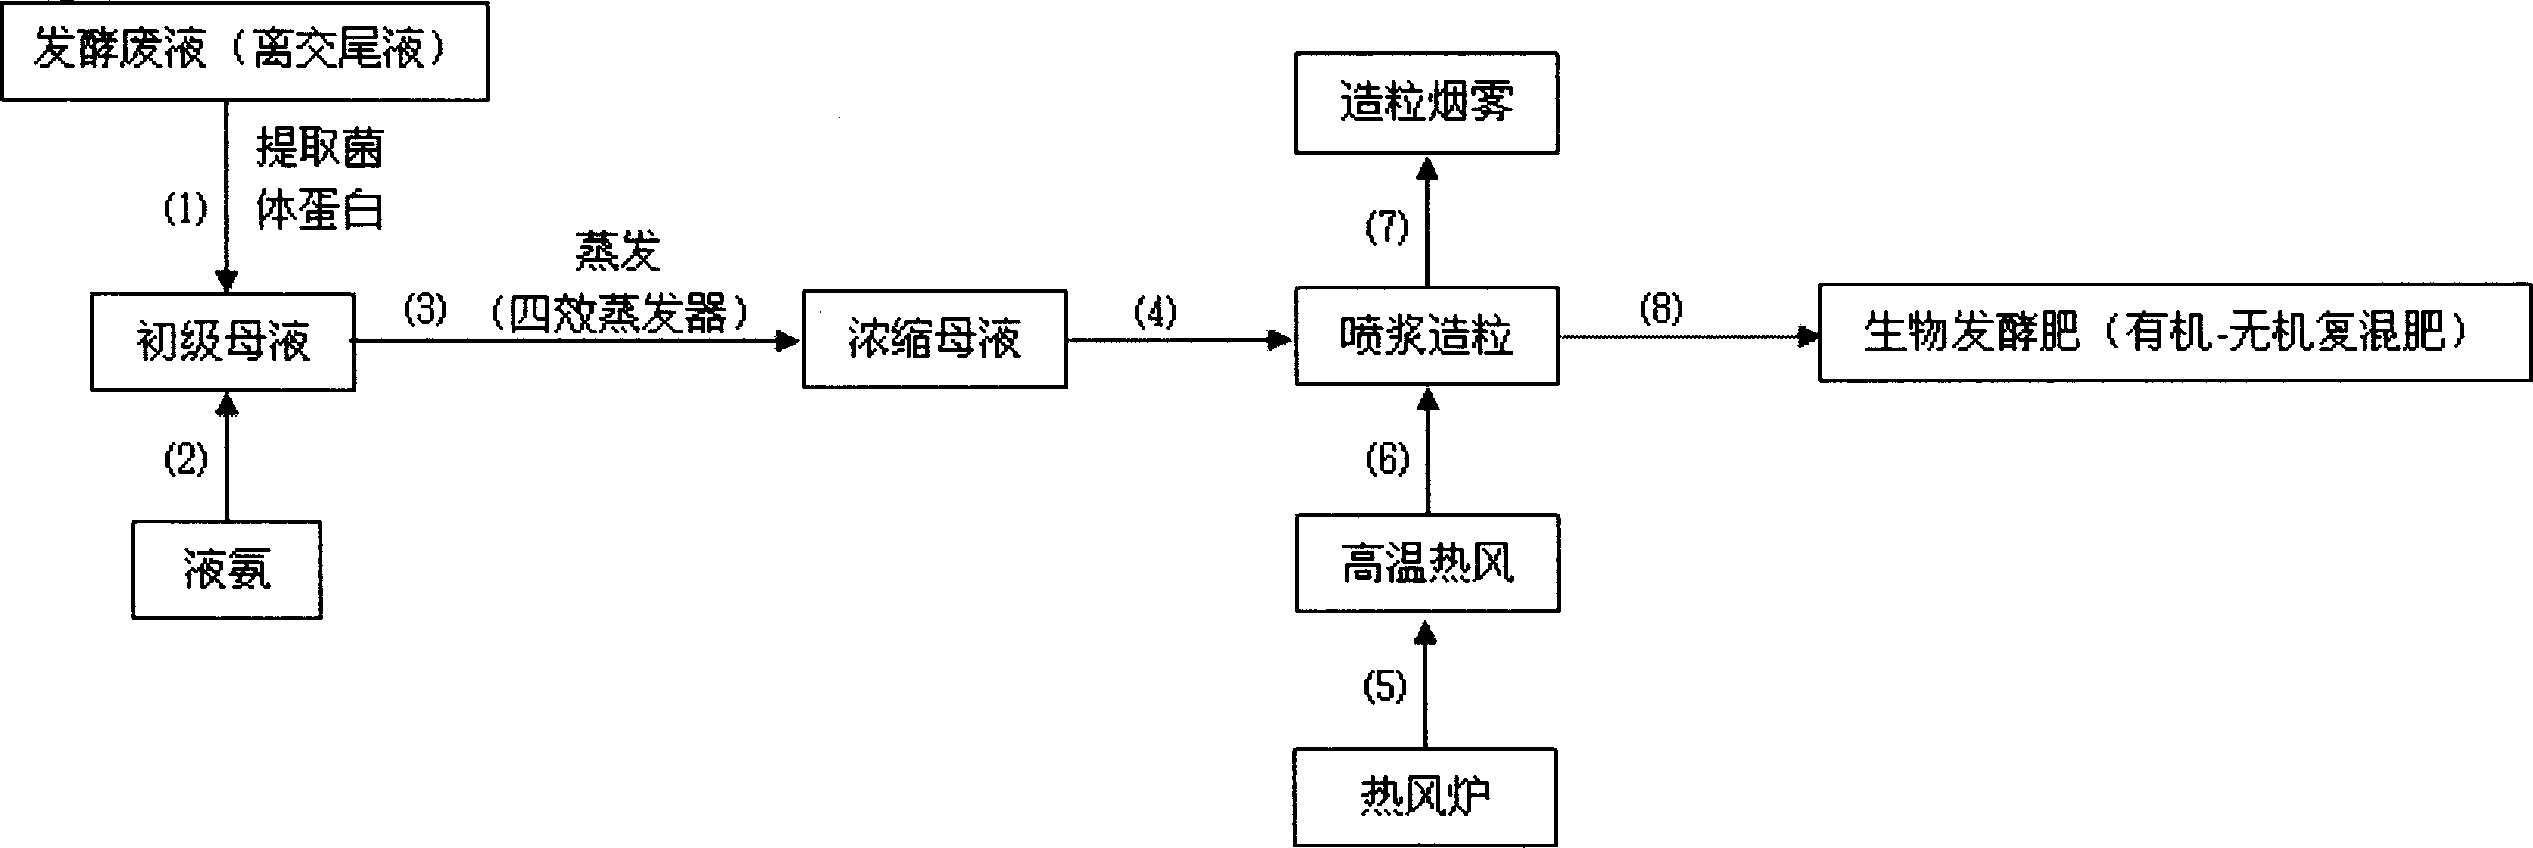 Process for producing biological fermented (organic-inorganic compound mixed) fertilizer from glutaminic acid fermenting waste liquid